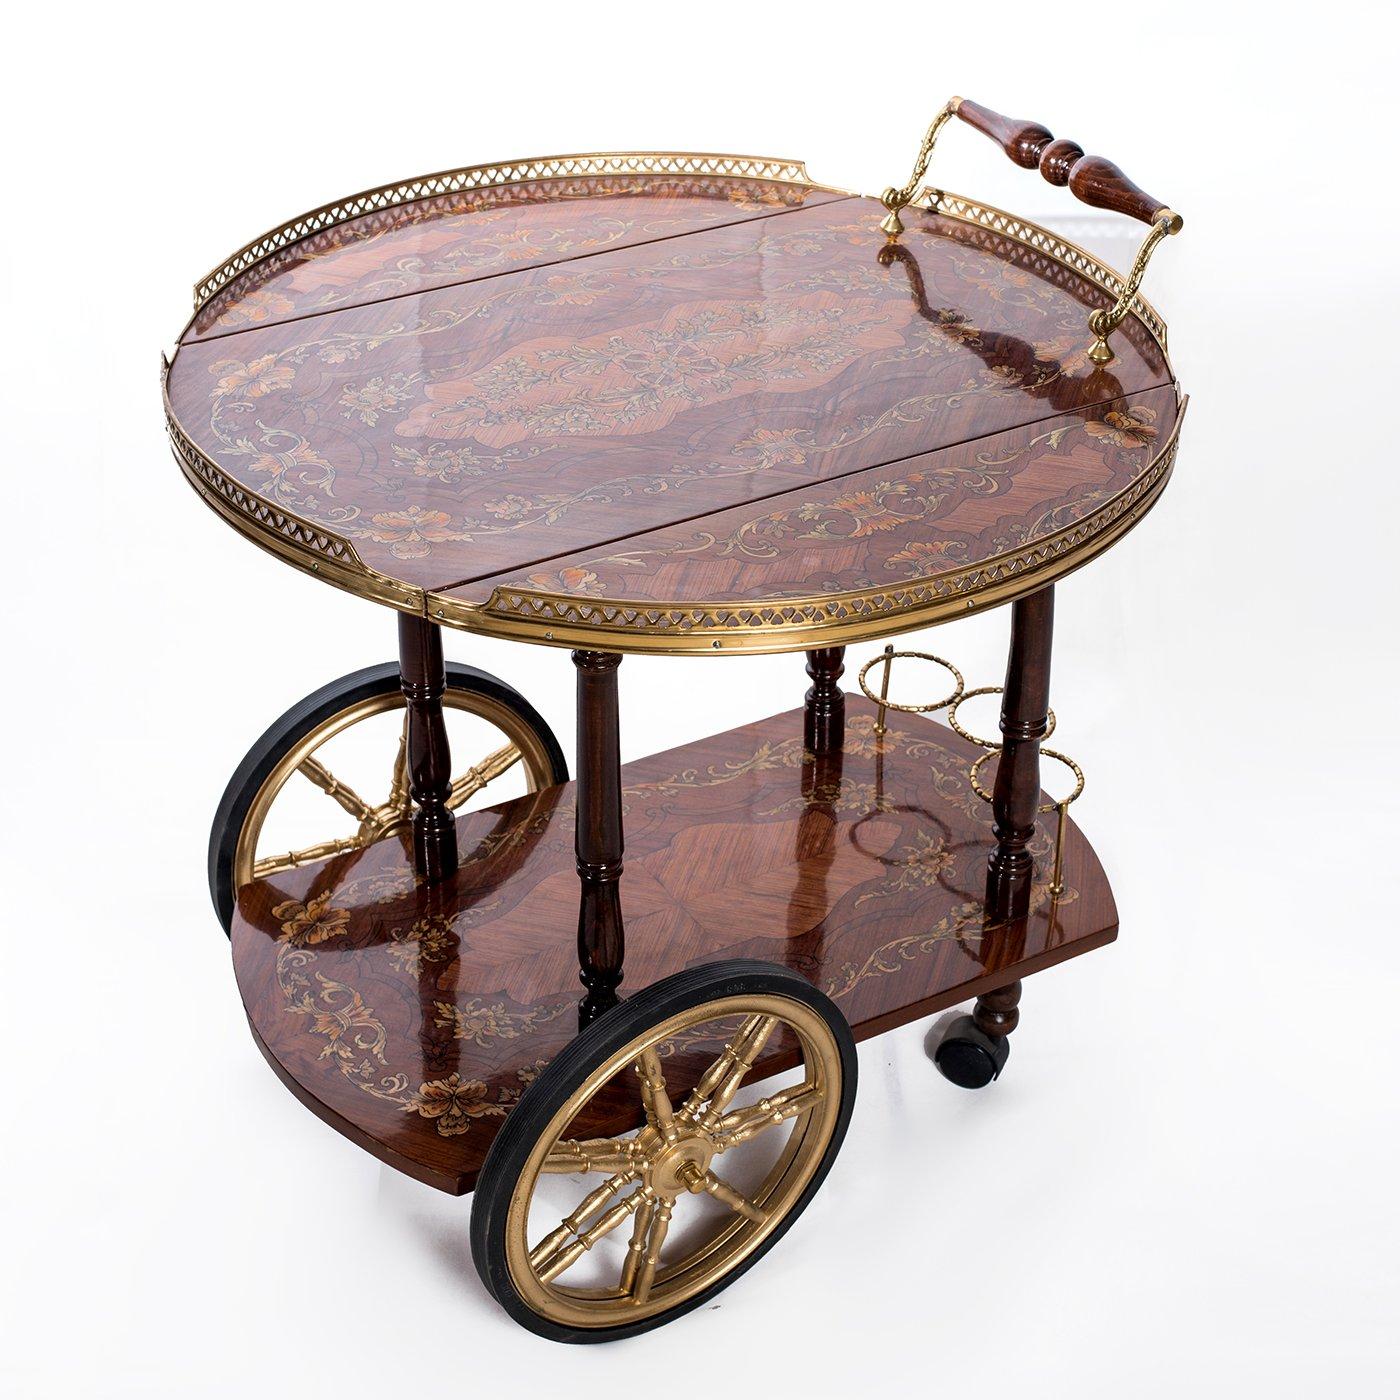 A beautiful Italian inlaid tea cart 19th century style, 20th century. 

Exquisite handmade Italian inlaid tea cart covered with natural veneer and decorated both tiers with Marqueterie floral and leaf designs, in addition to brass bottle holders,